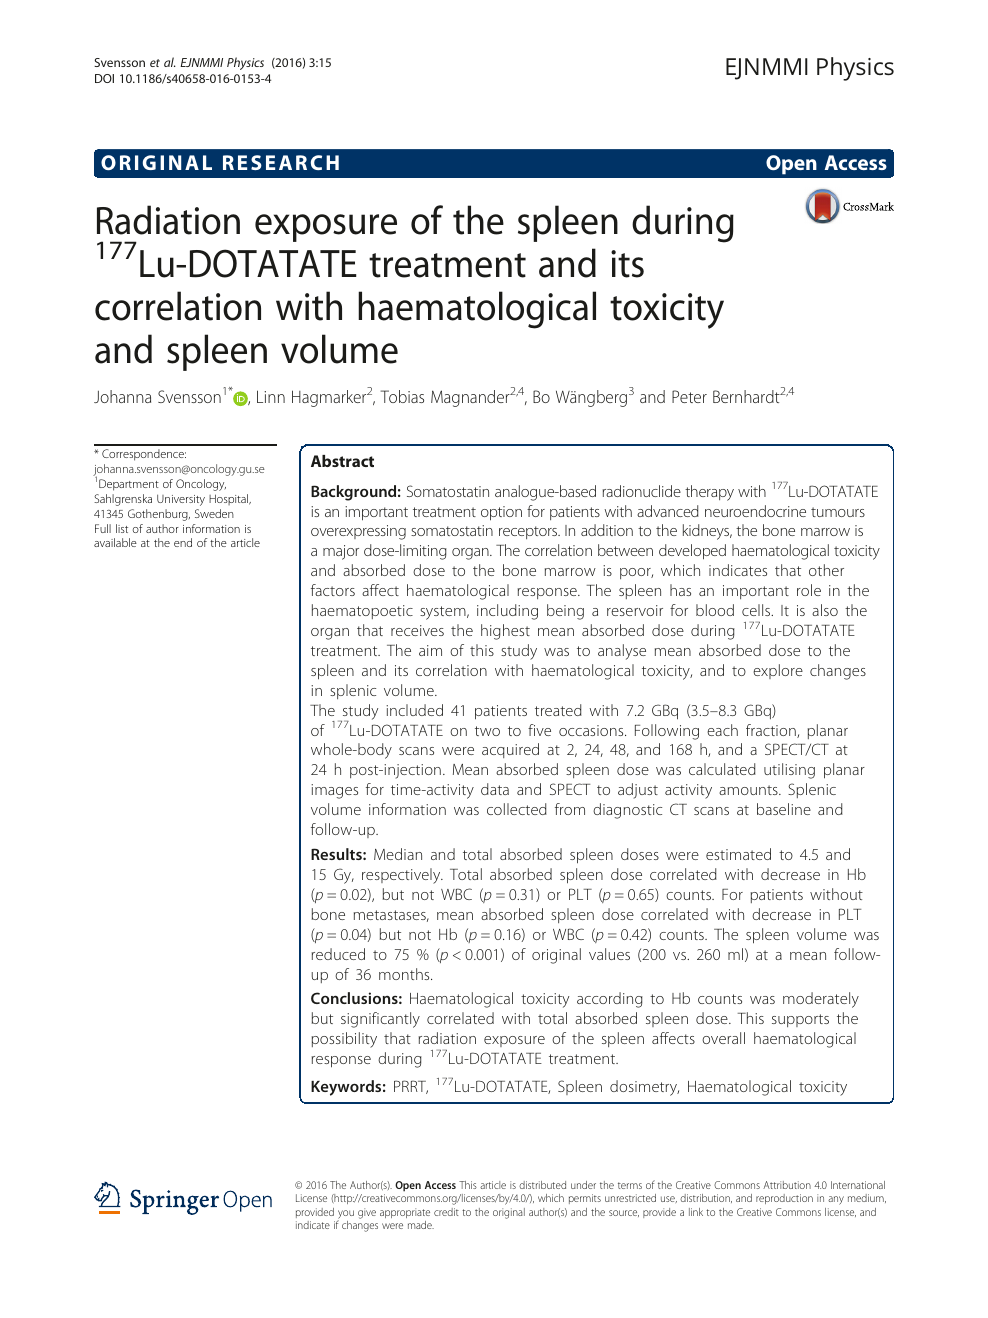 Radiation Exposure Of The Spleen During 177lu Dotatate Treatment And Its Correlation With Haematological Toxicity And Spleen Volume Topic Of Research Paper In Clinical Medicine Download Scholarly Article Pdf And Read For